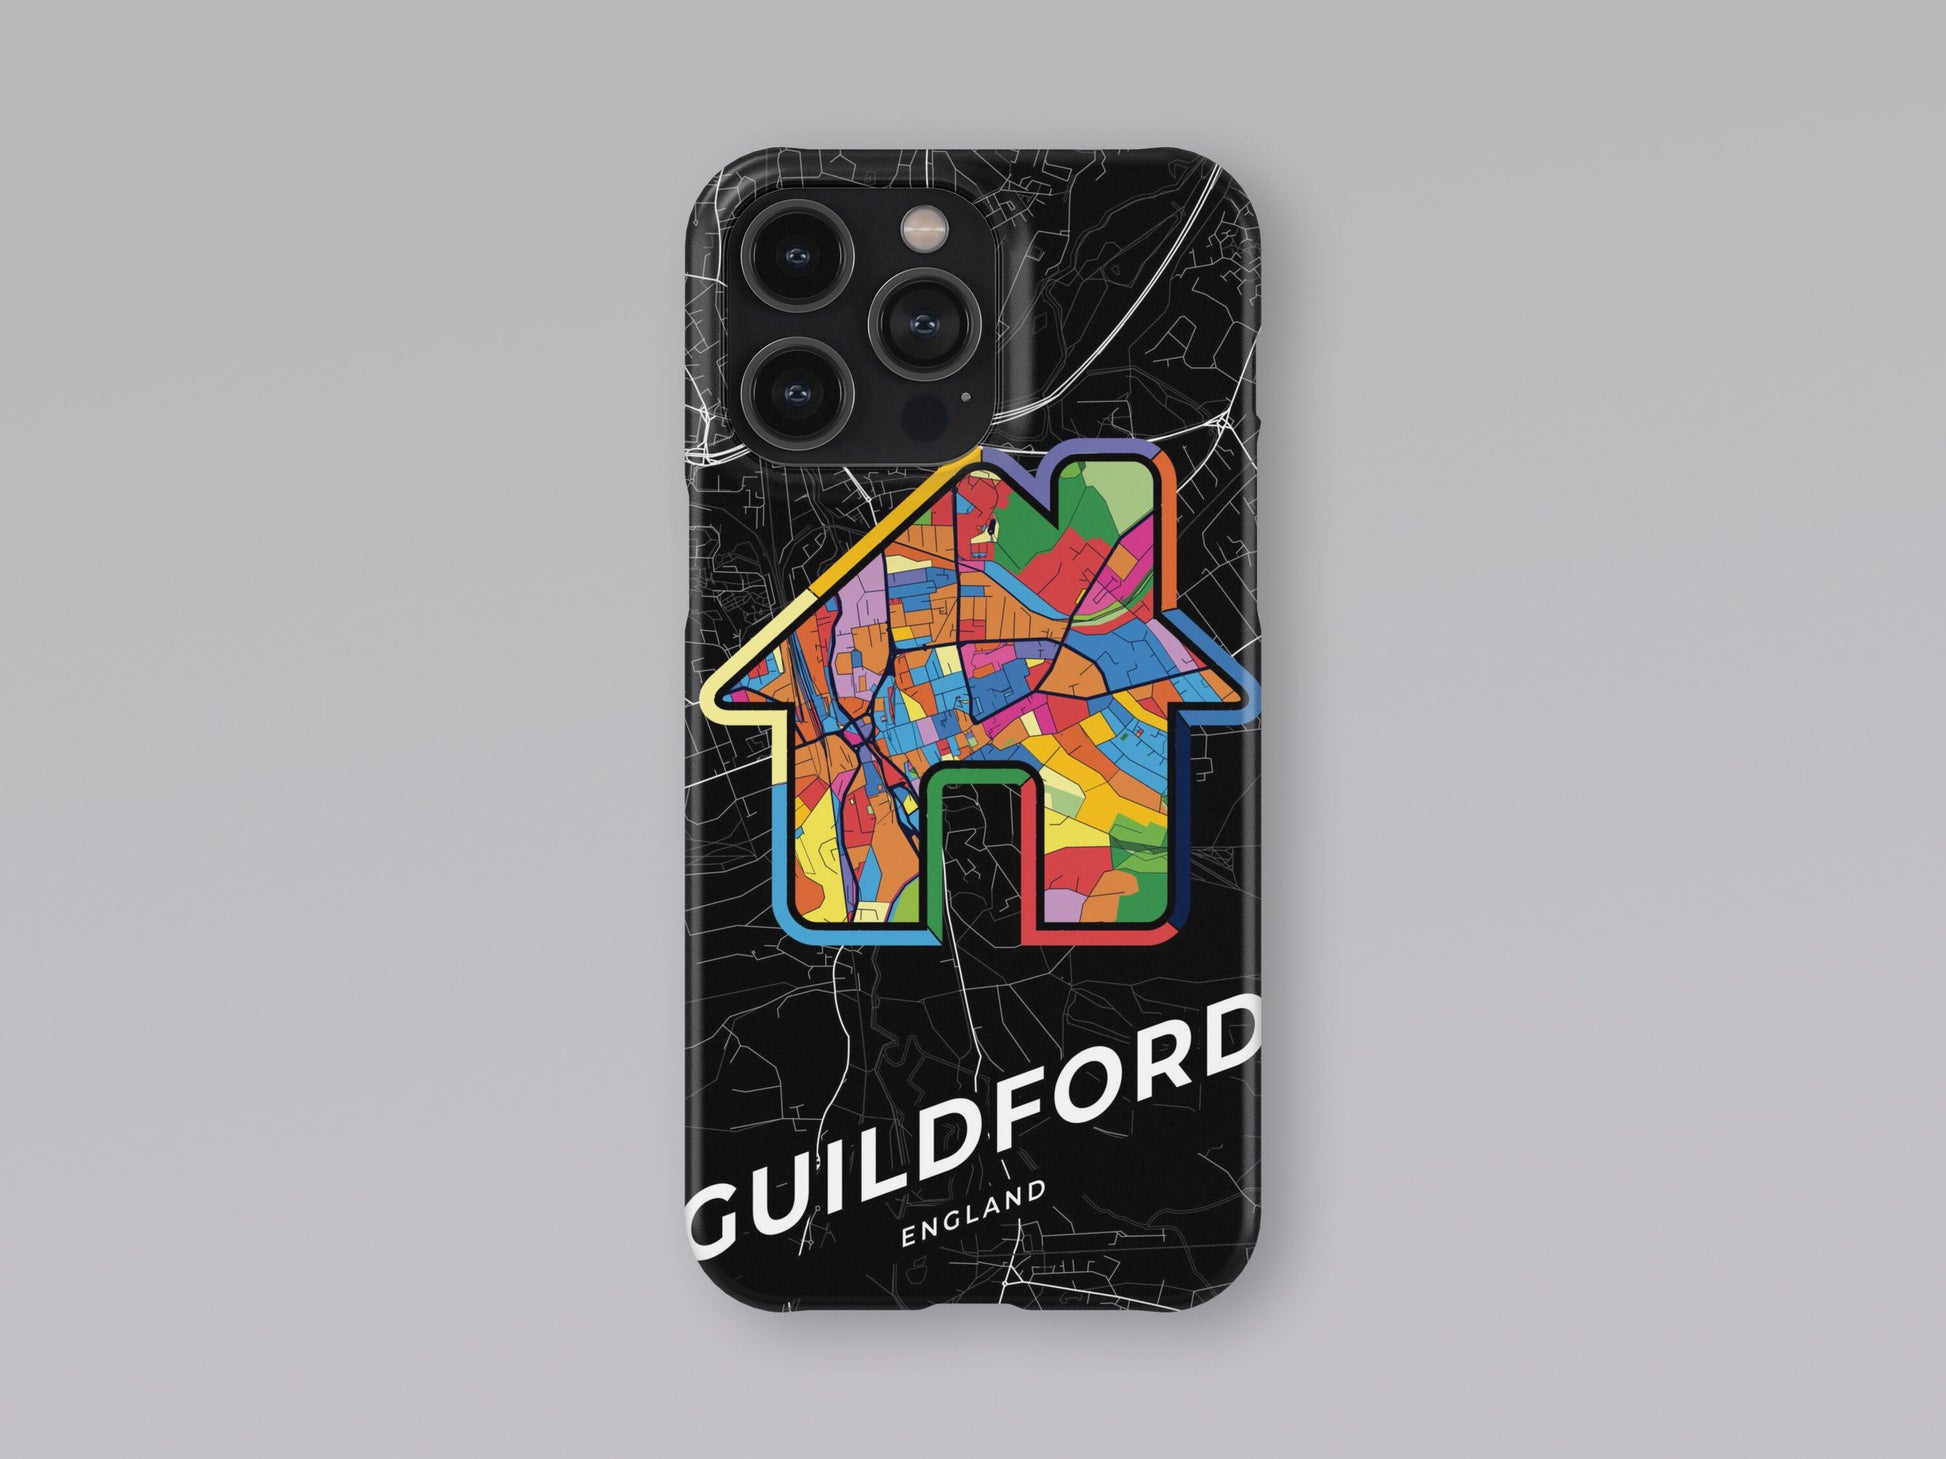 Guildford England slim phone case with colorful icon. Birthday, wedding or housewarming gift. Couple match cases. 3